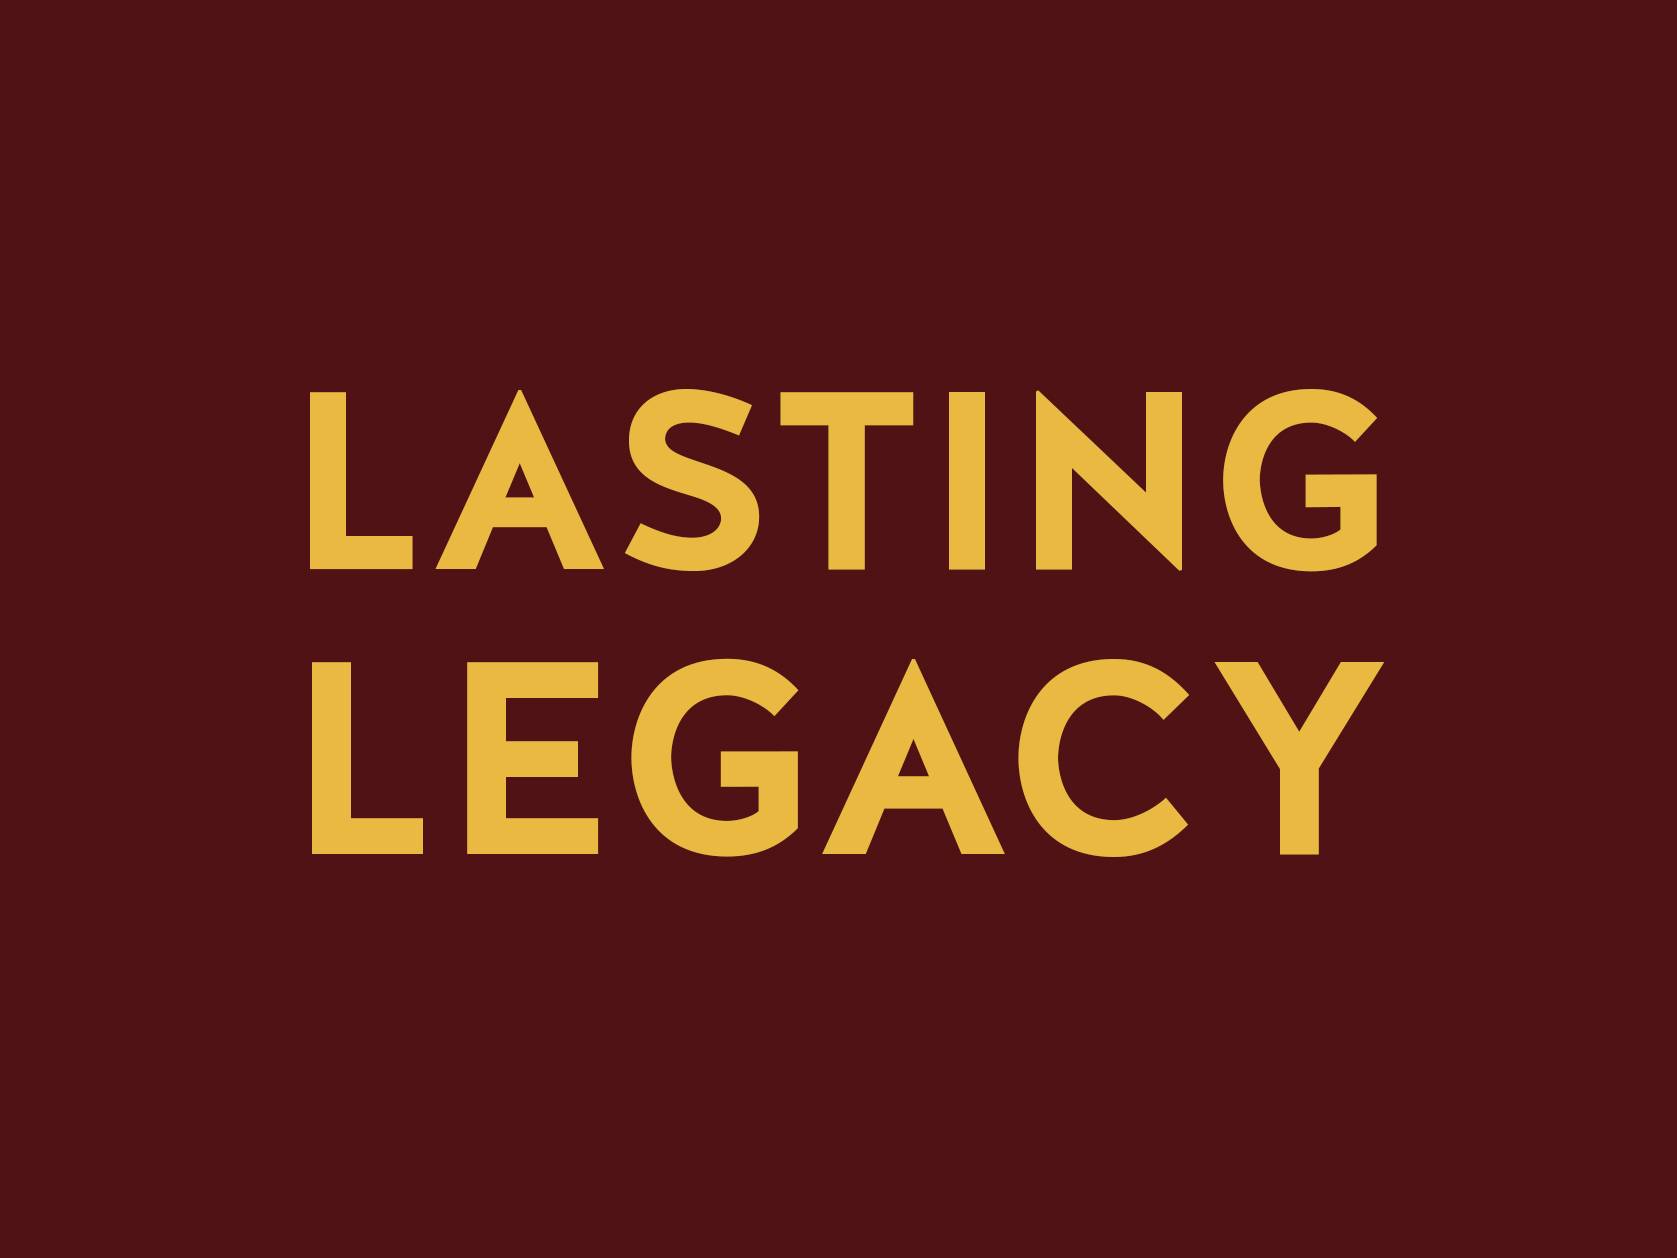 'lasting legacy' in gold writing on maroon background